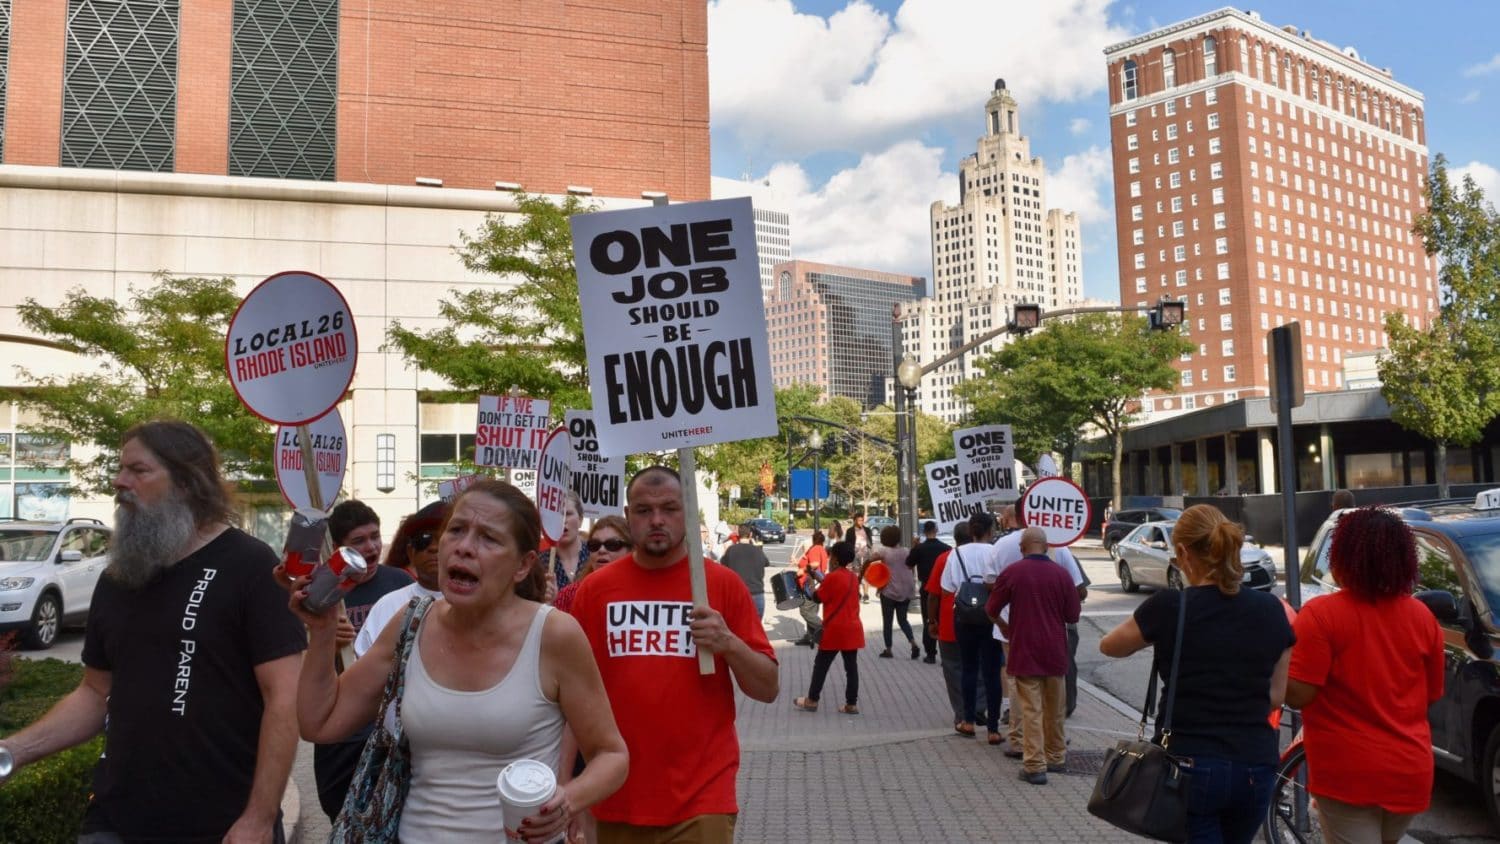 Unite Here! Local 26 members and allies hold Labor Day picket outside the Omni Providence Hotel